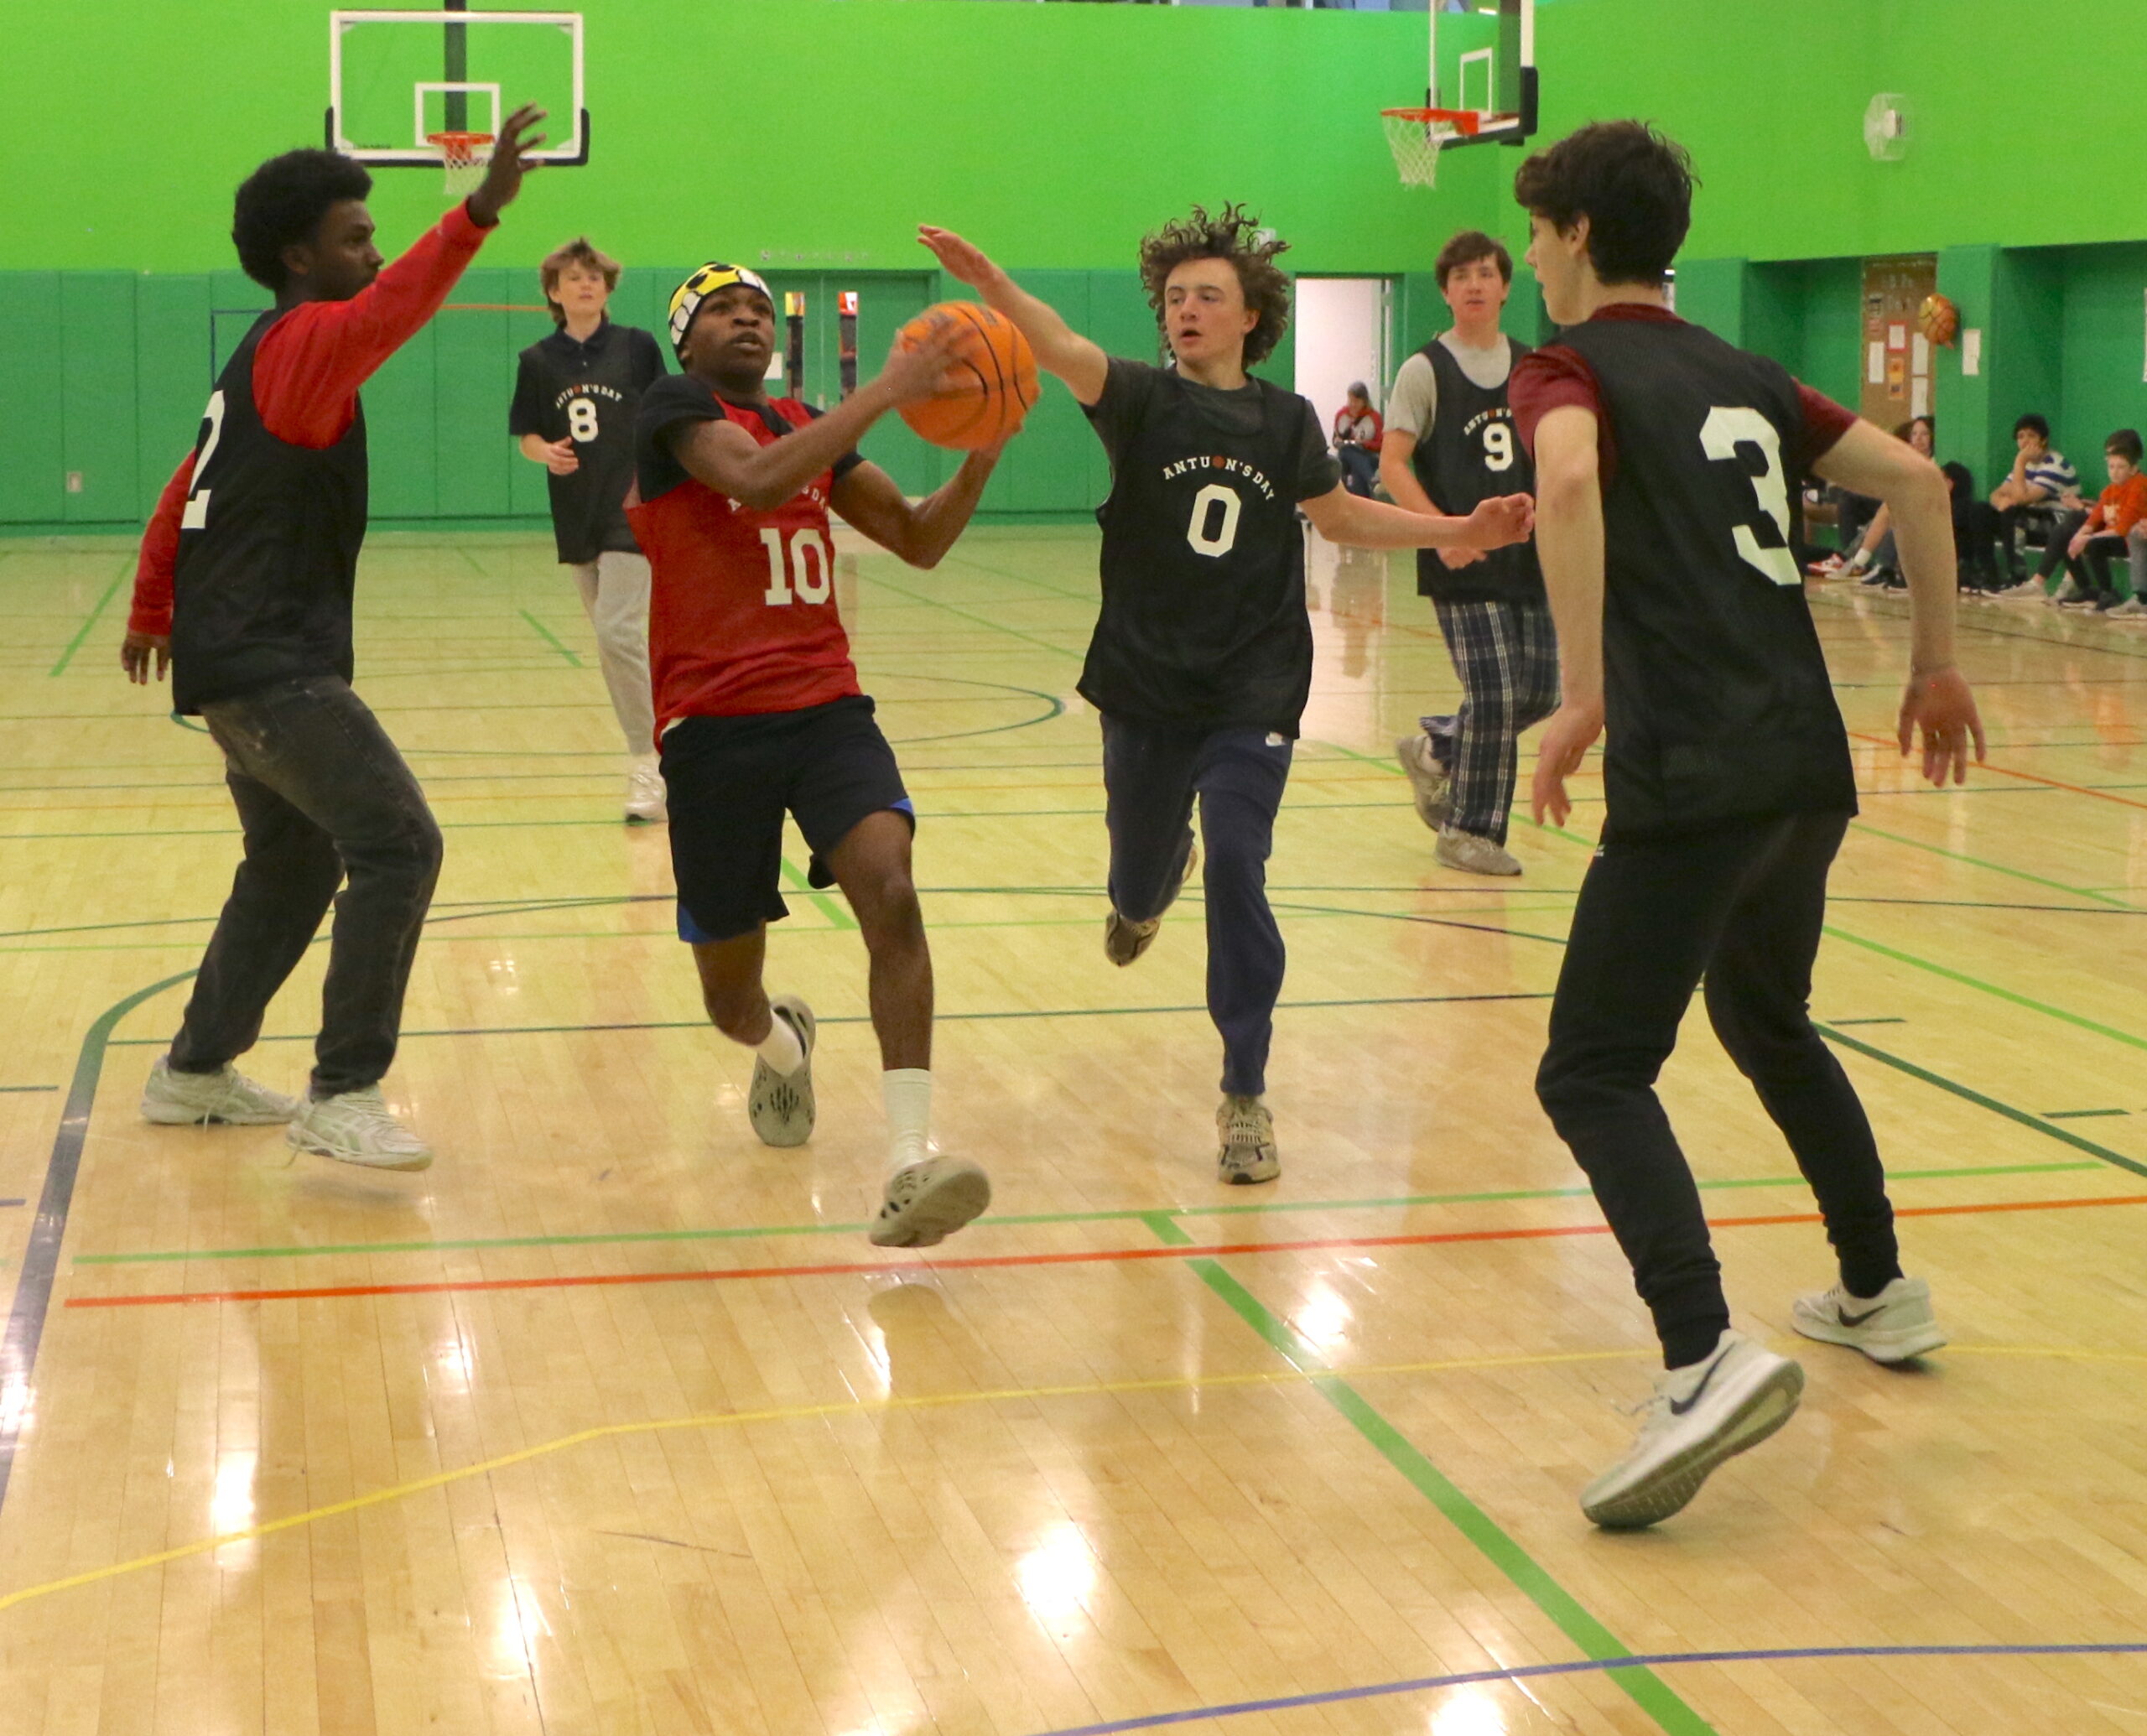 Students playing a basketball game